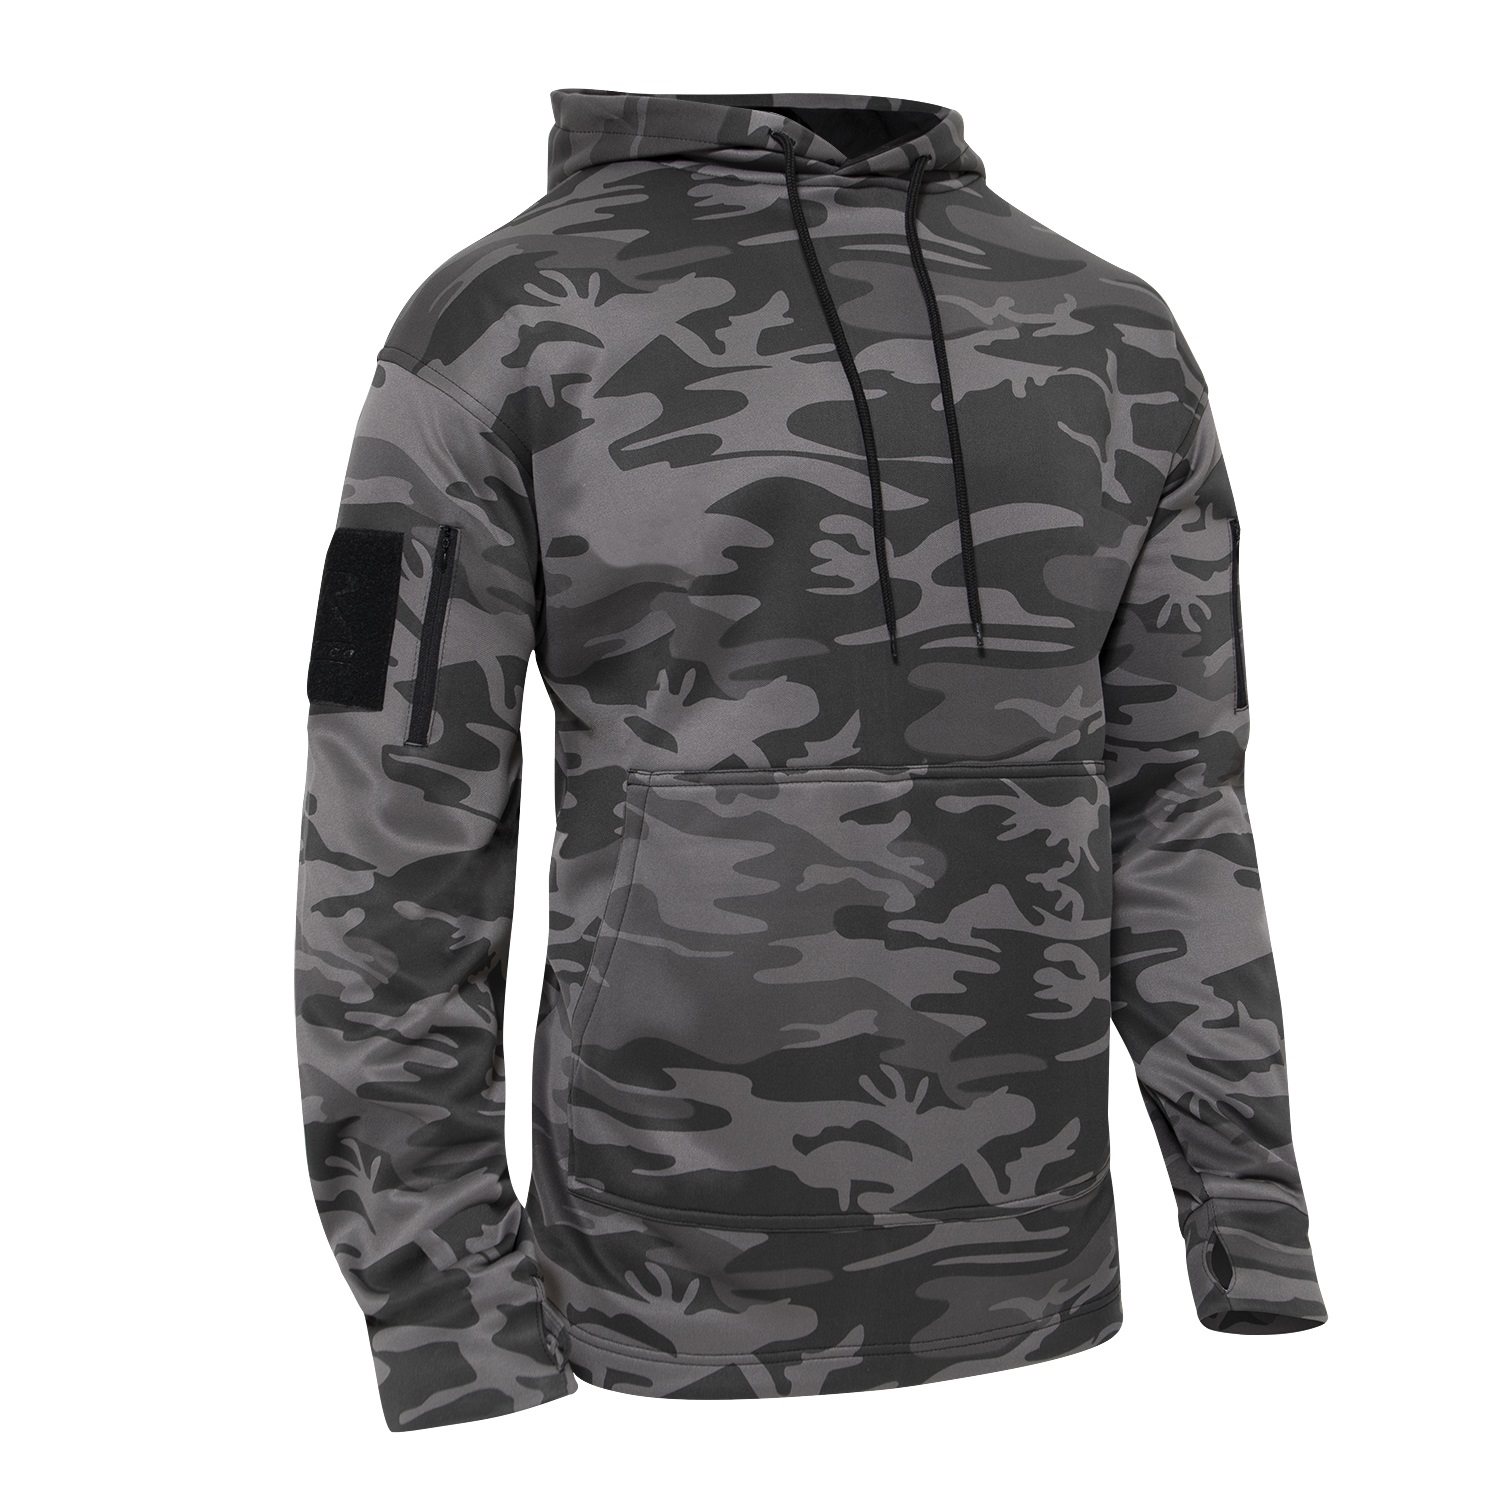 Mikina CONCEALED CARRY s kapuc BLACK CAMO